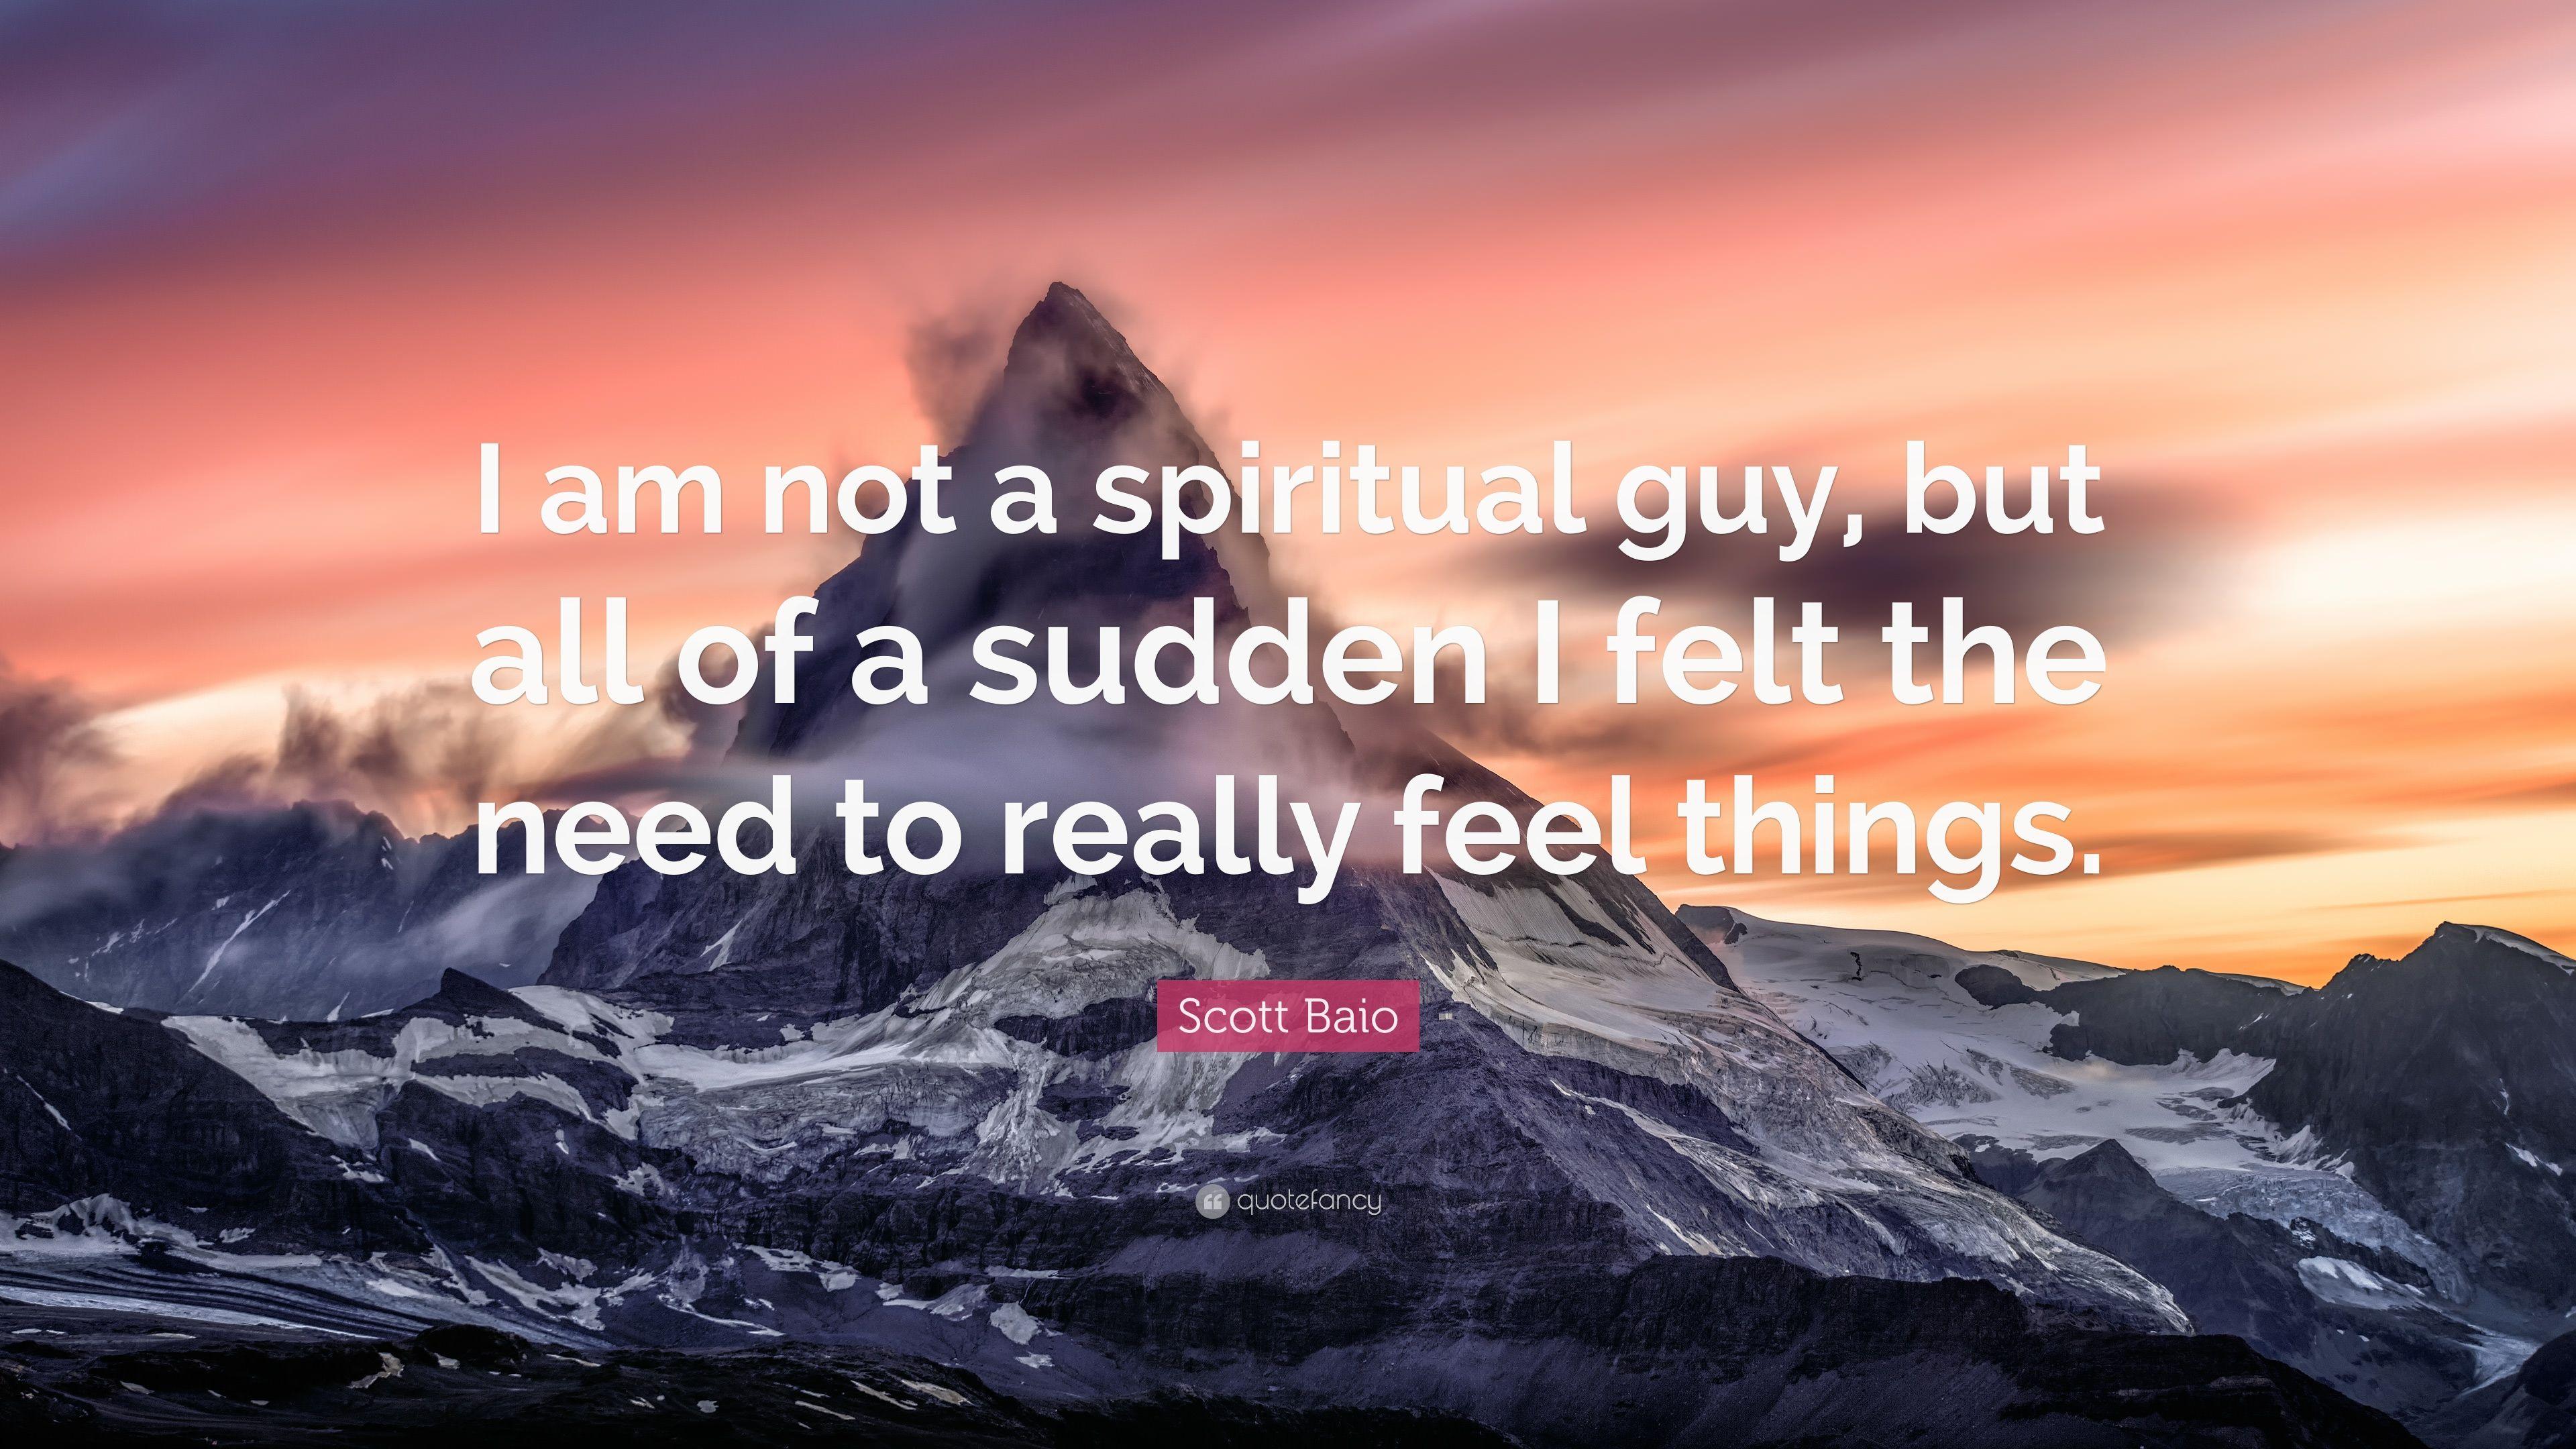 Scott Baio Quote: “I am not a spiritual guy, but all of a sudden I